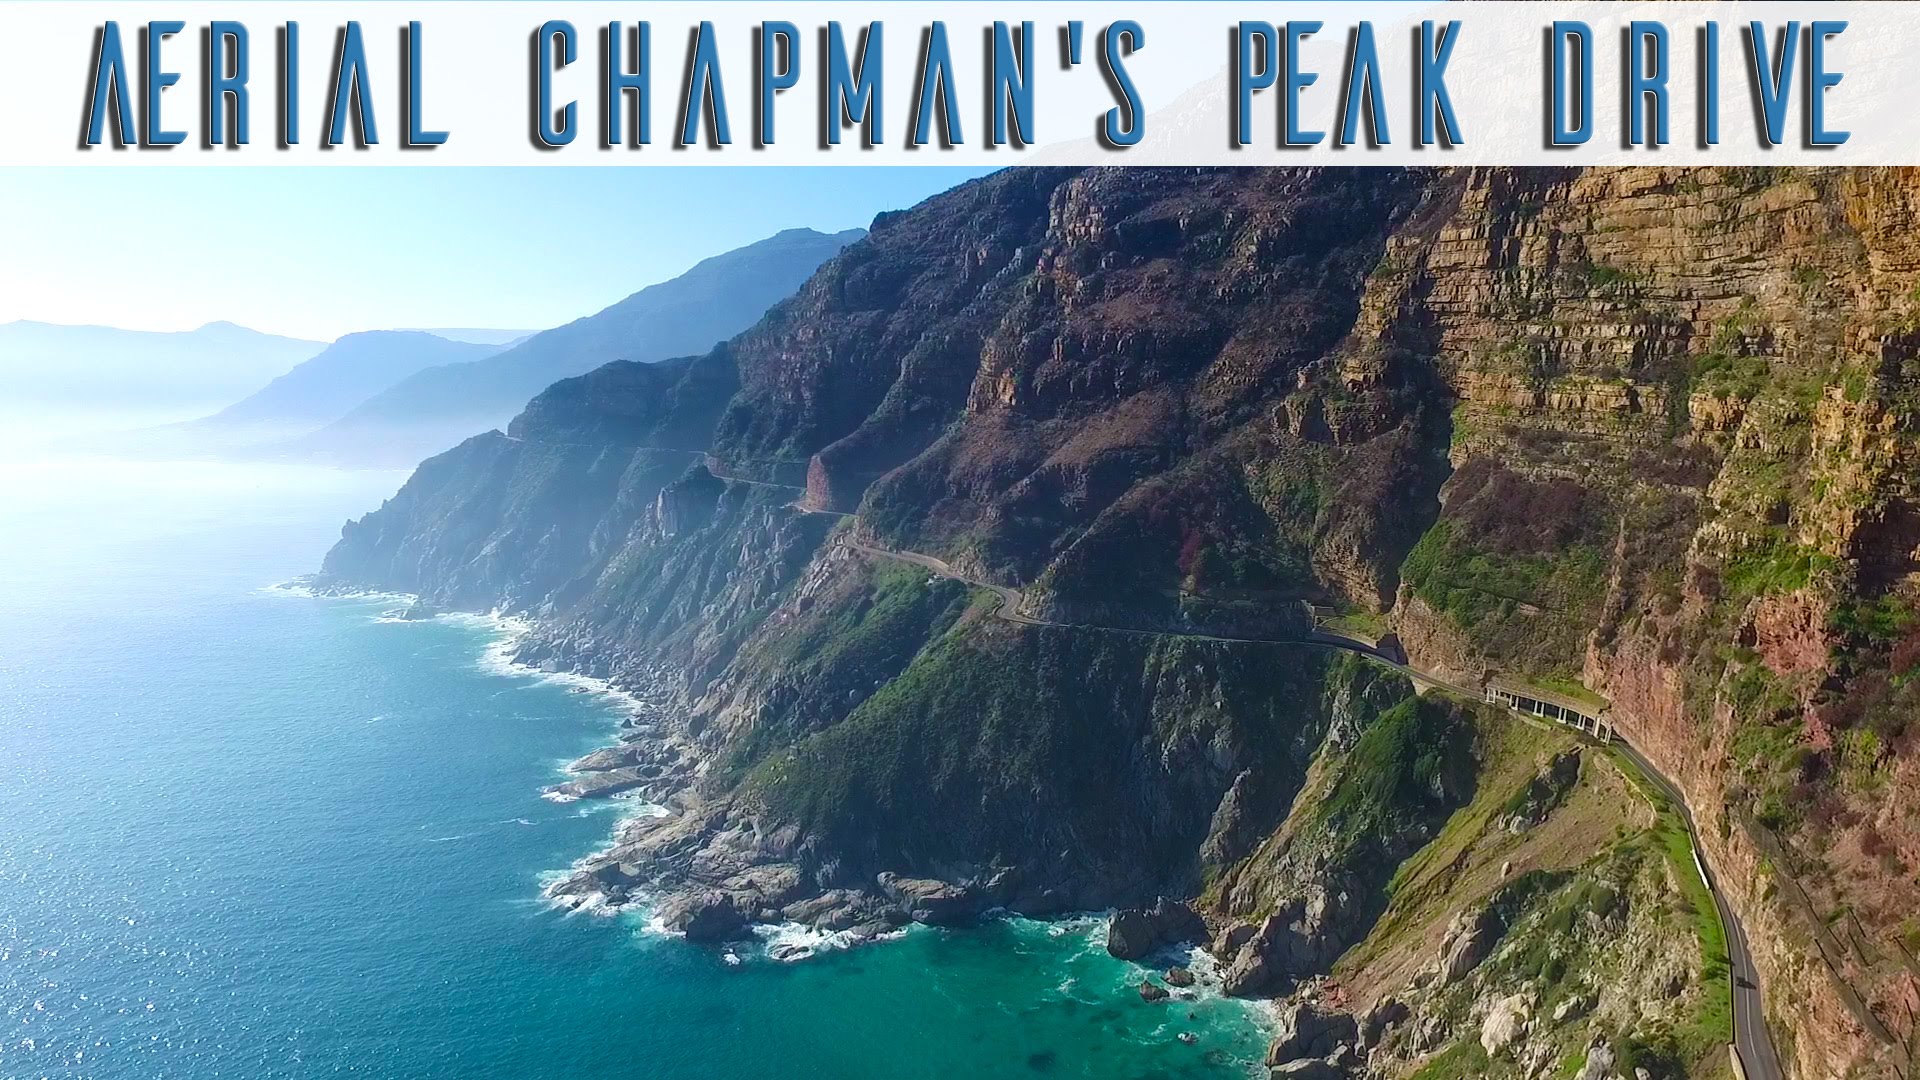 Chapmans Peak Drive, Cape Town, An Aerial View - YouTube